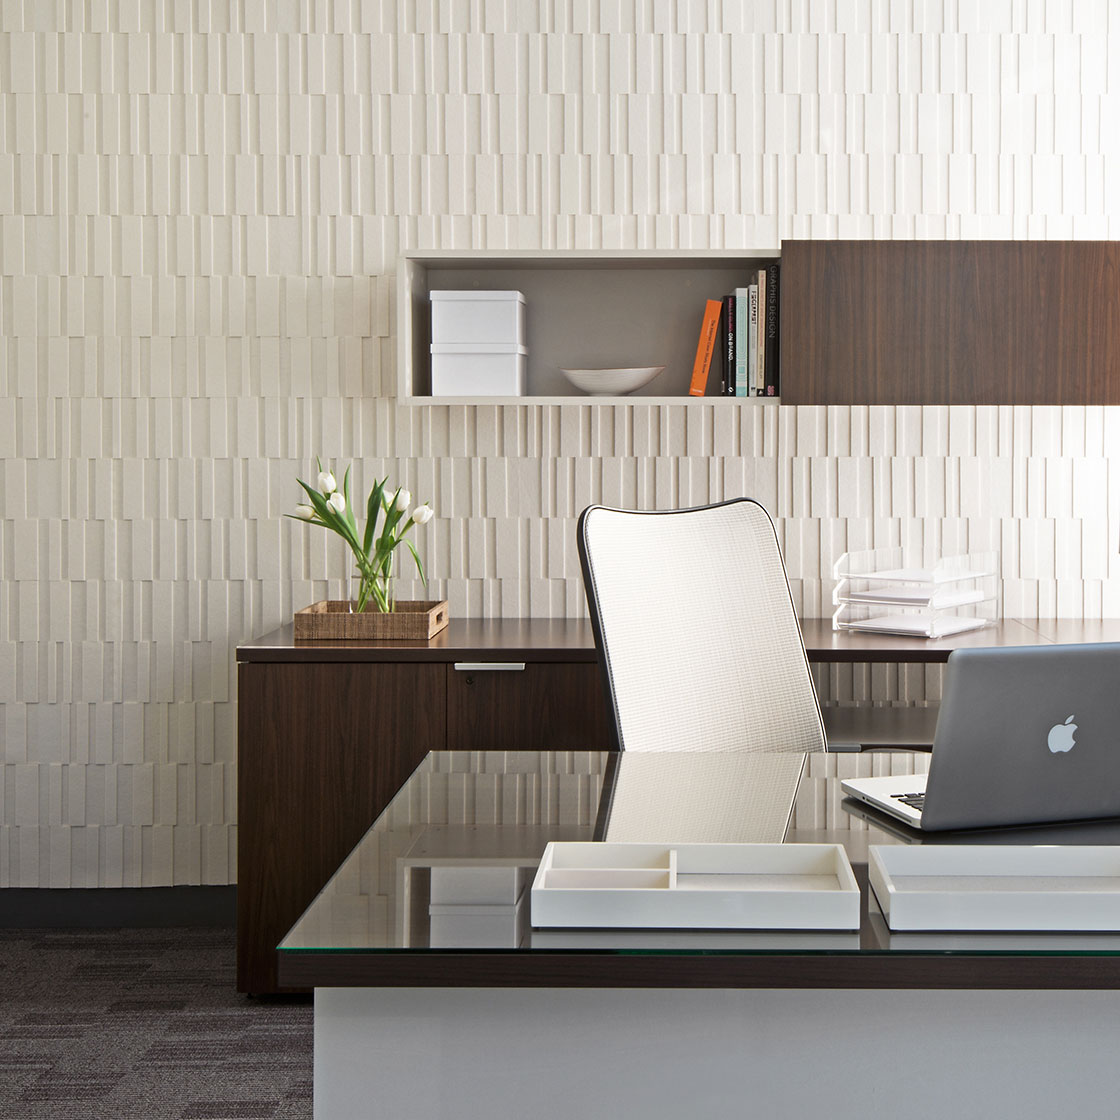 An office space with a cream felt wall covering with alternating vertical rectangular shapes.